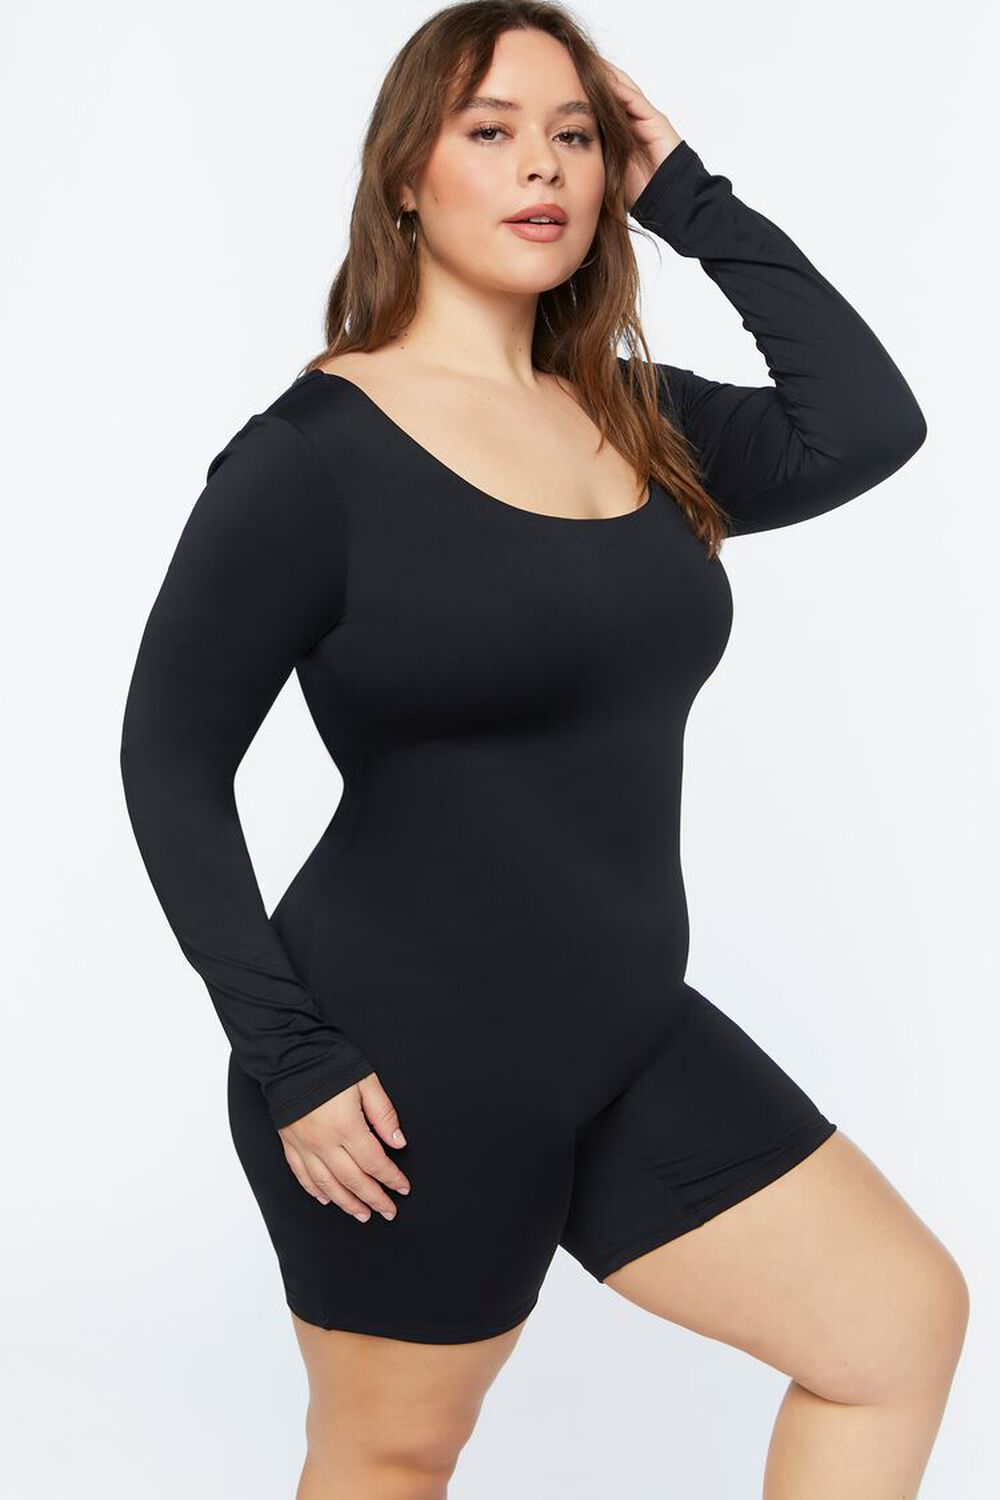 BLACK Plus Size Fitted Scoop-Neck Romper, image 2